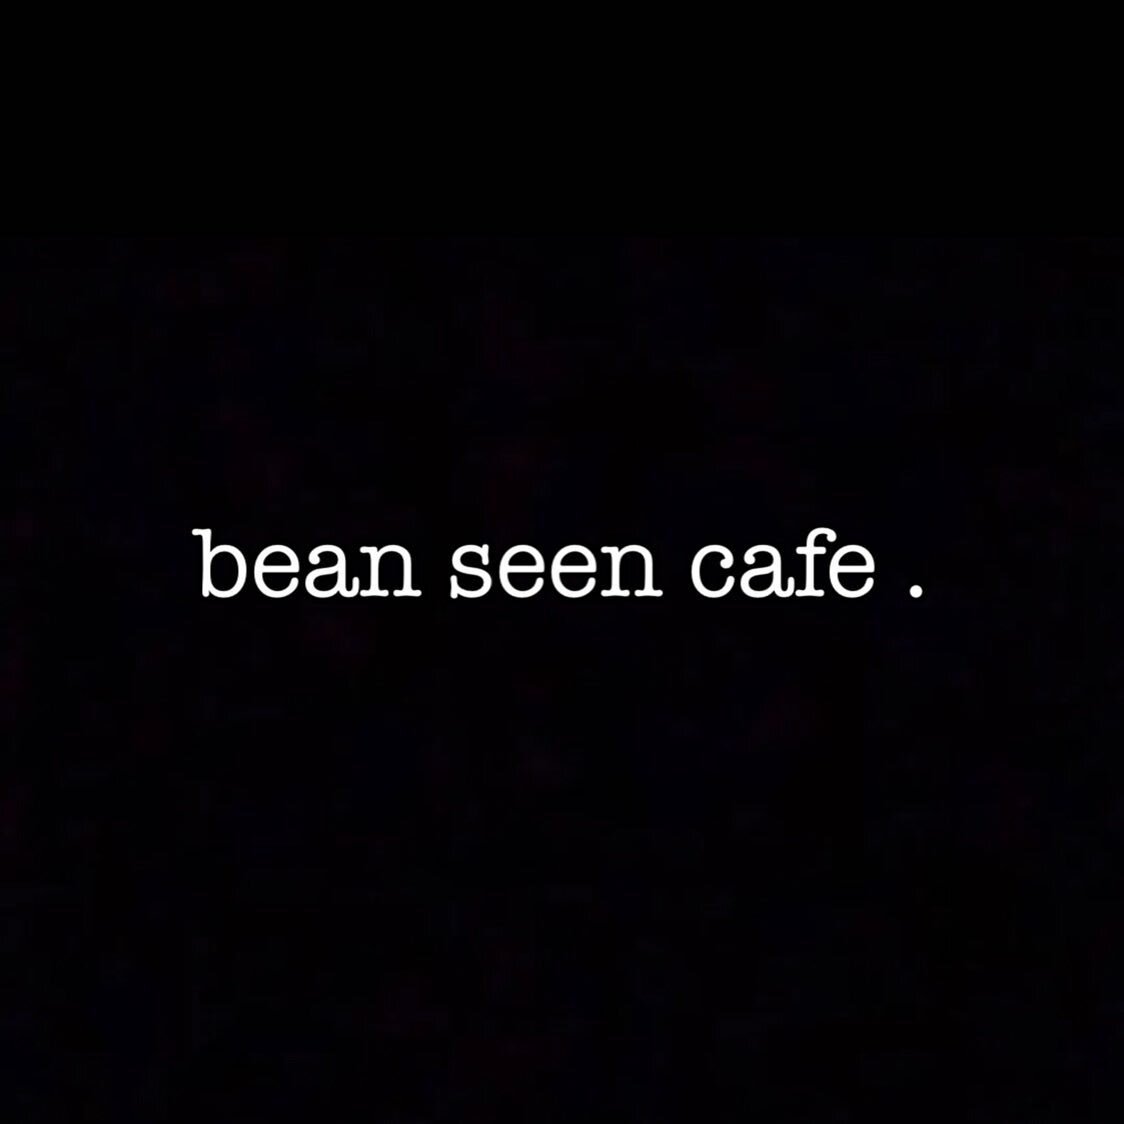 We are looking for an experienced part time cook to join our team! Must be available Monday to Saturday. DM or send resume to hello@beanseencafe.com.au